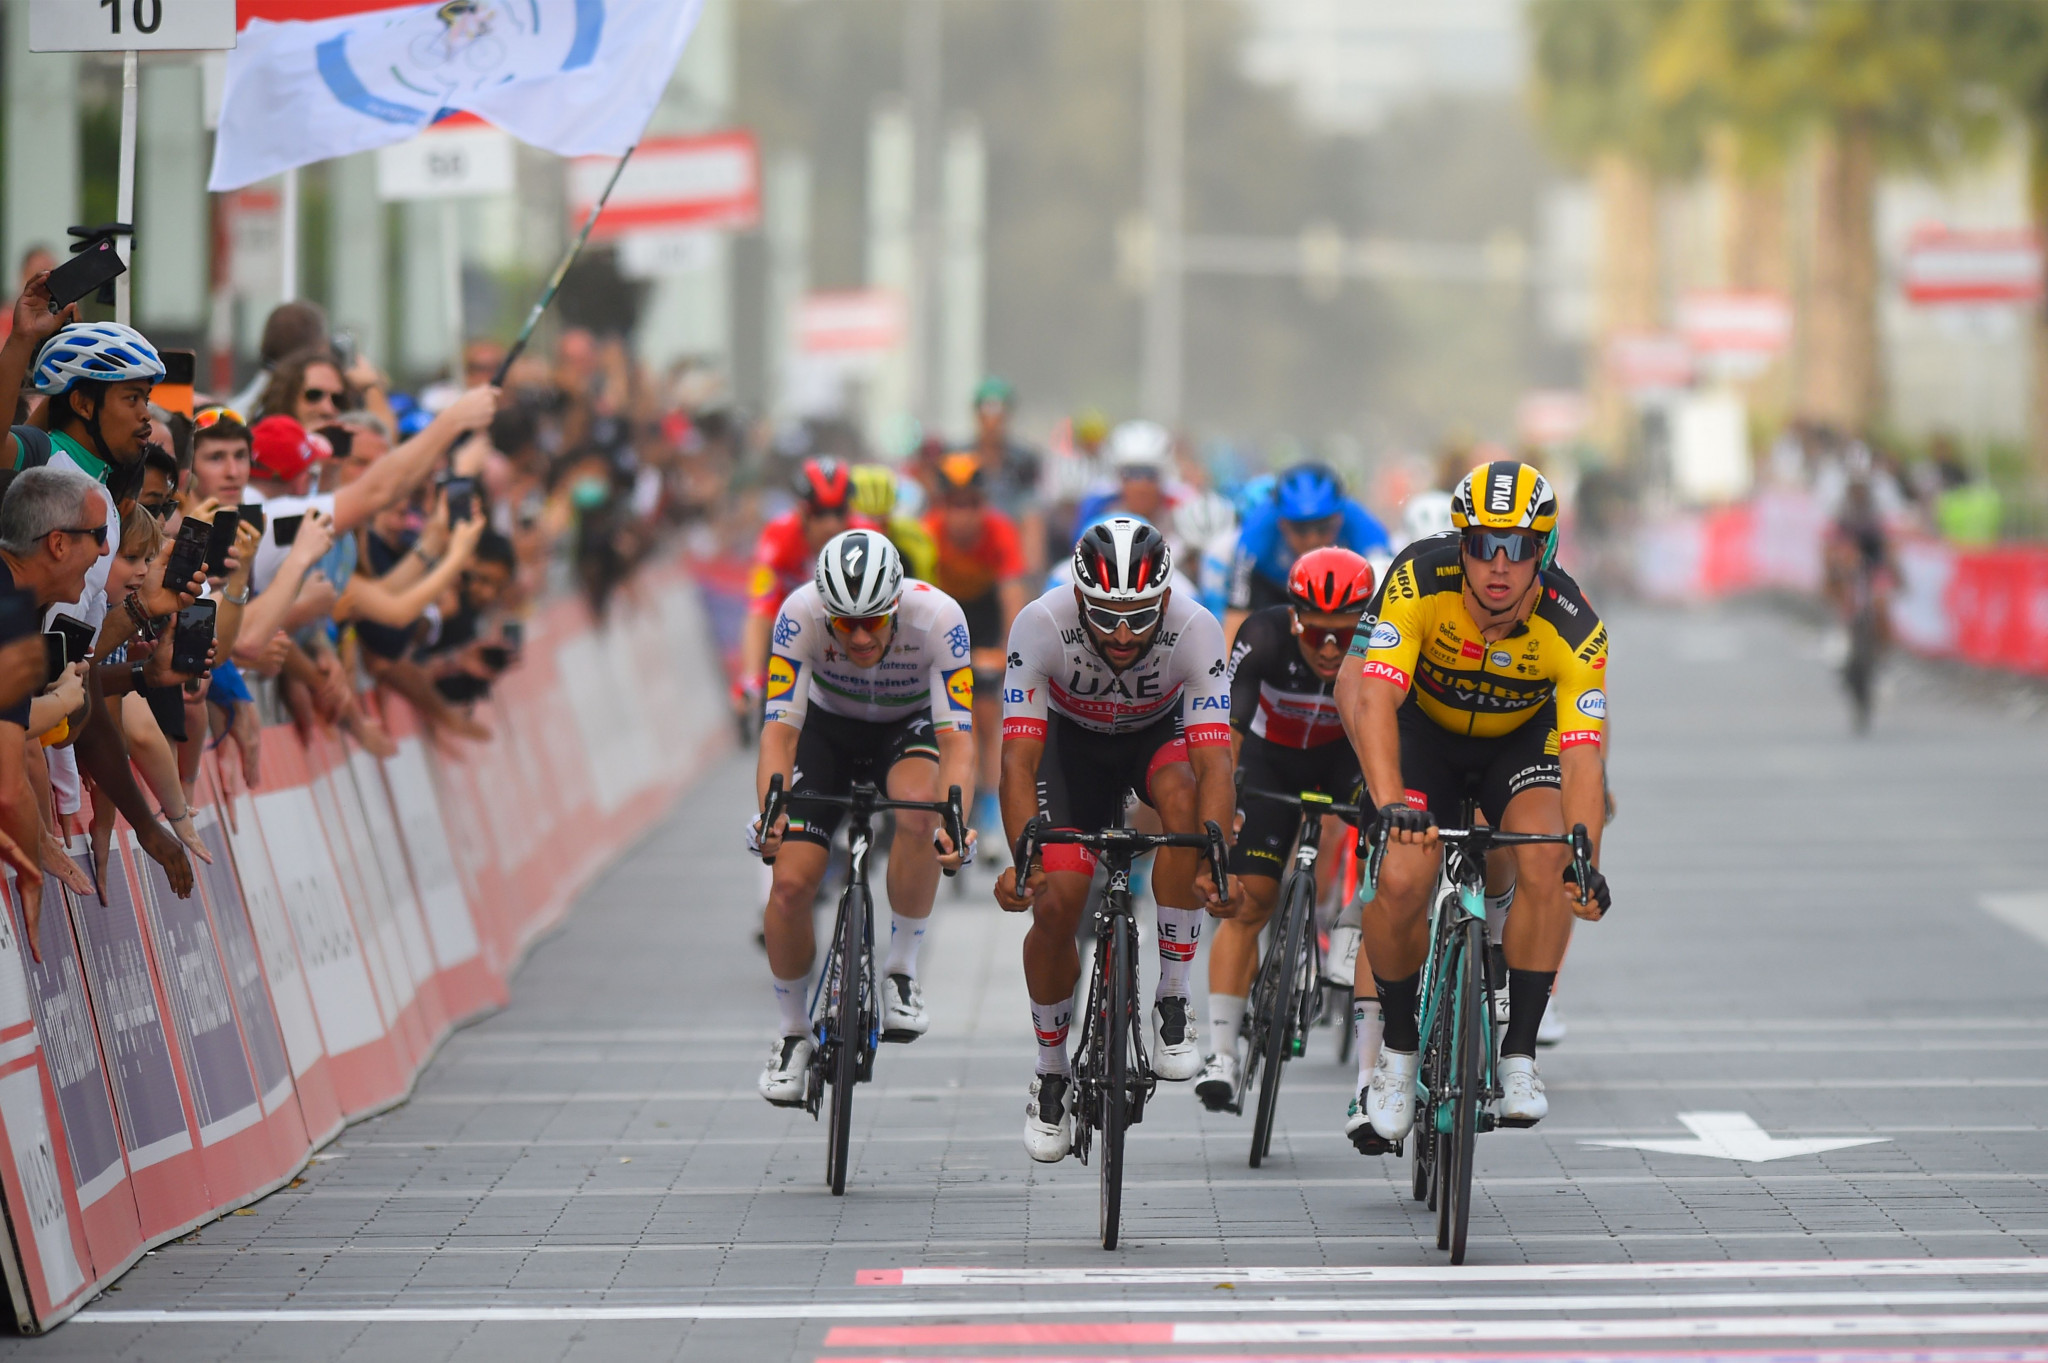 Dylan Groenewegen crossed the line ahead of Colombia's Fernando Gaviria and Germany's Pascal Ackermann ©Getty Images